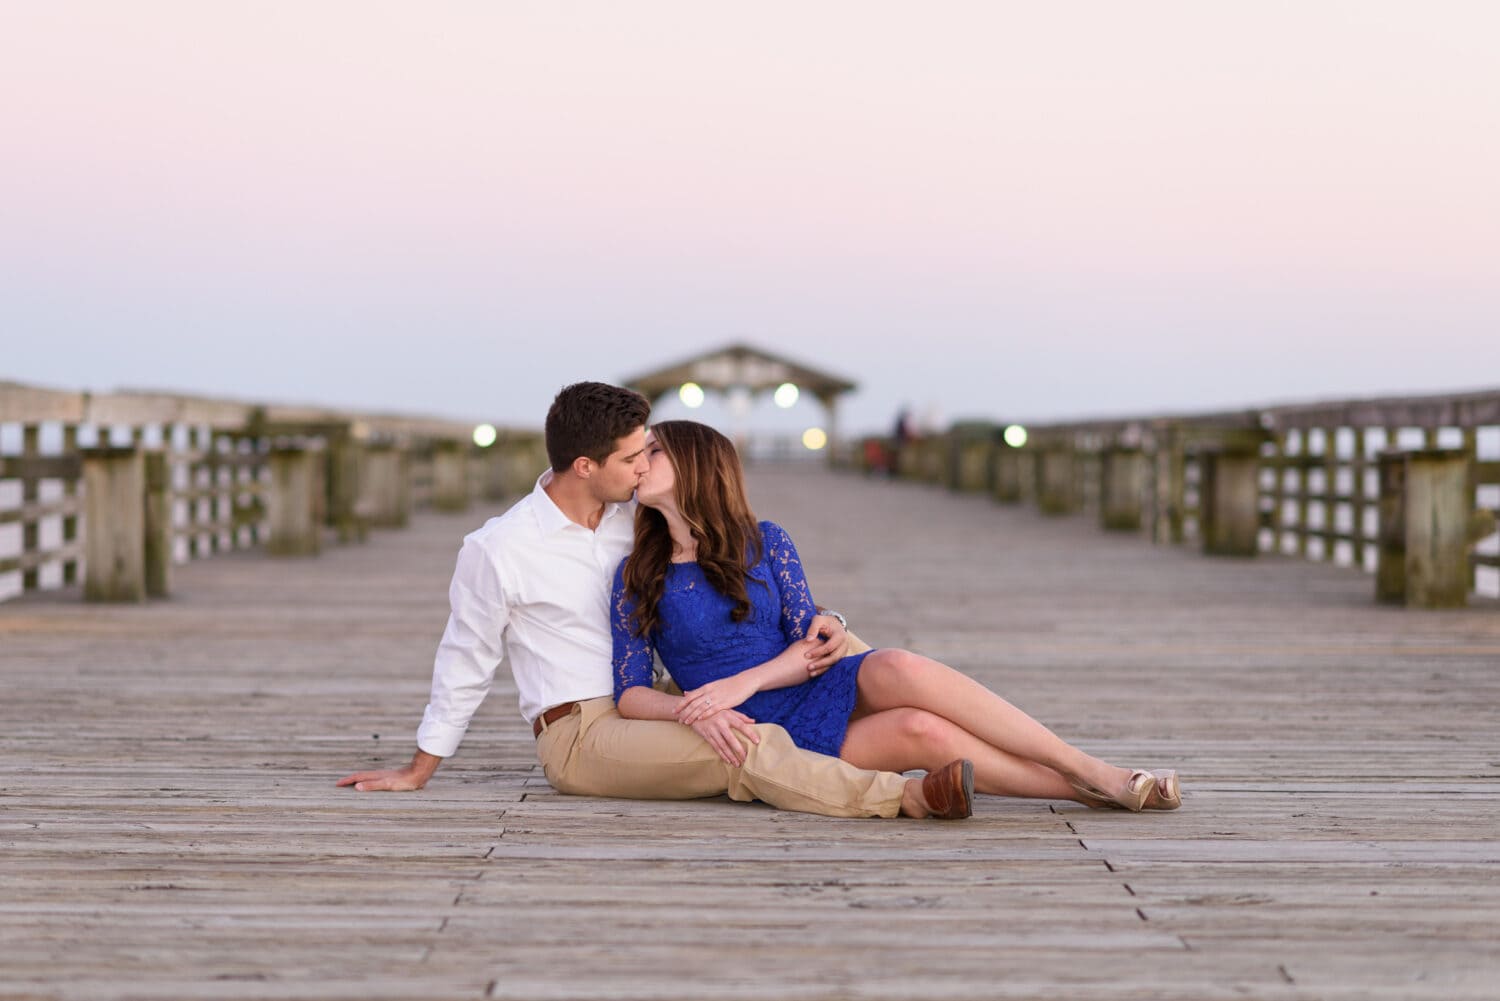 Kiss on the park pier on a winter day - Myrtle Beach State Park